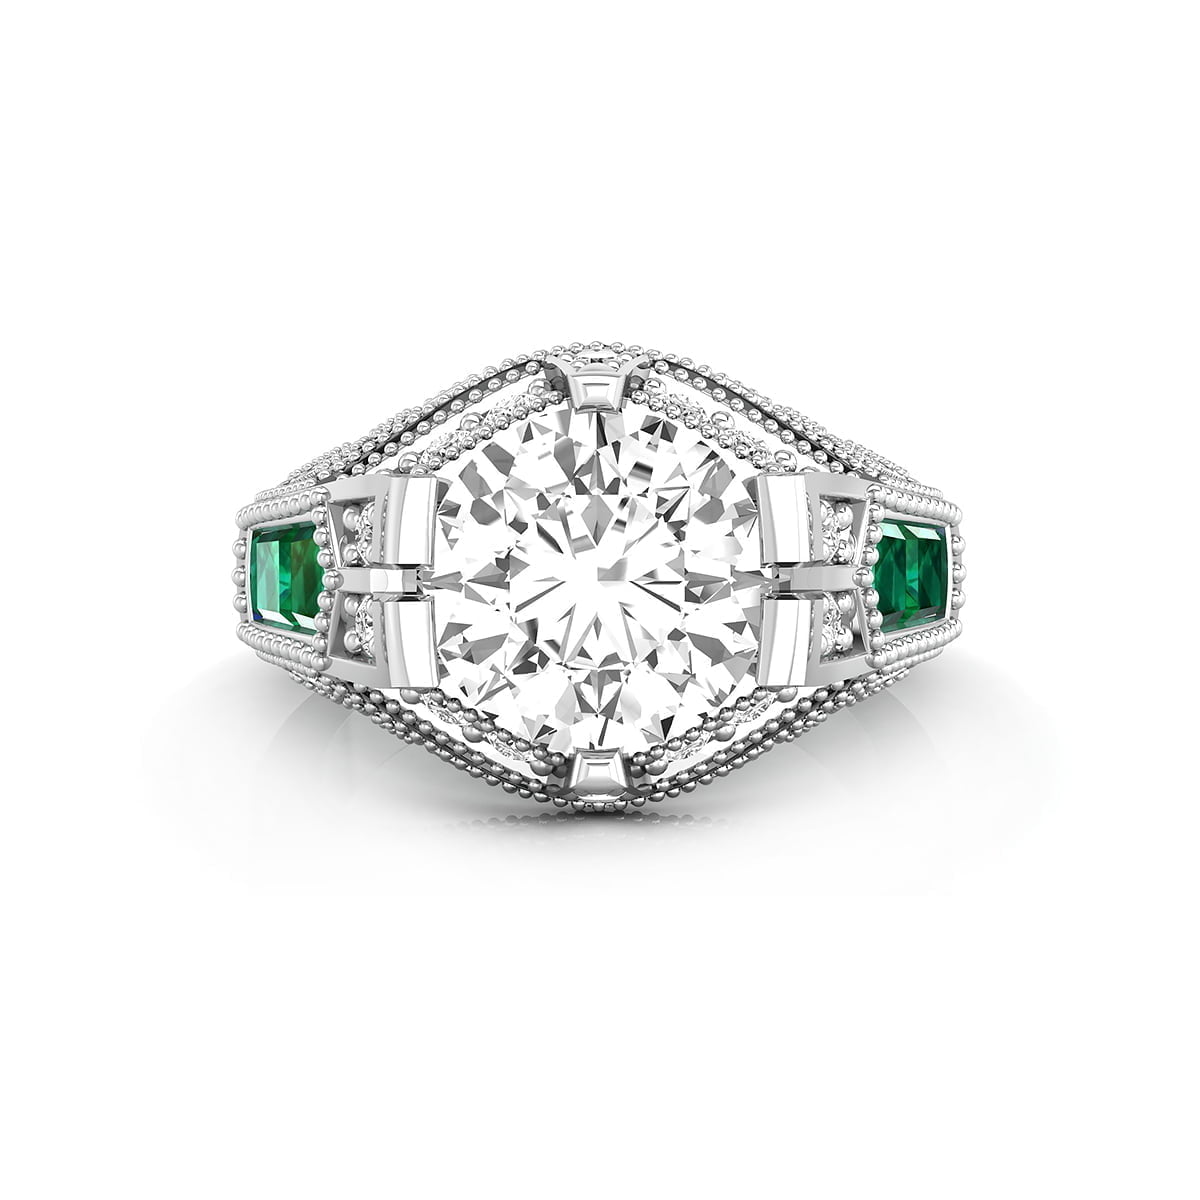 8 MM Round Or Green Baguette Cut CZ Stone Vintage Art Deco Wedding Ring For Women